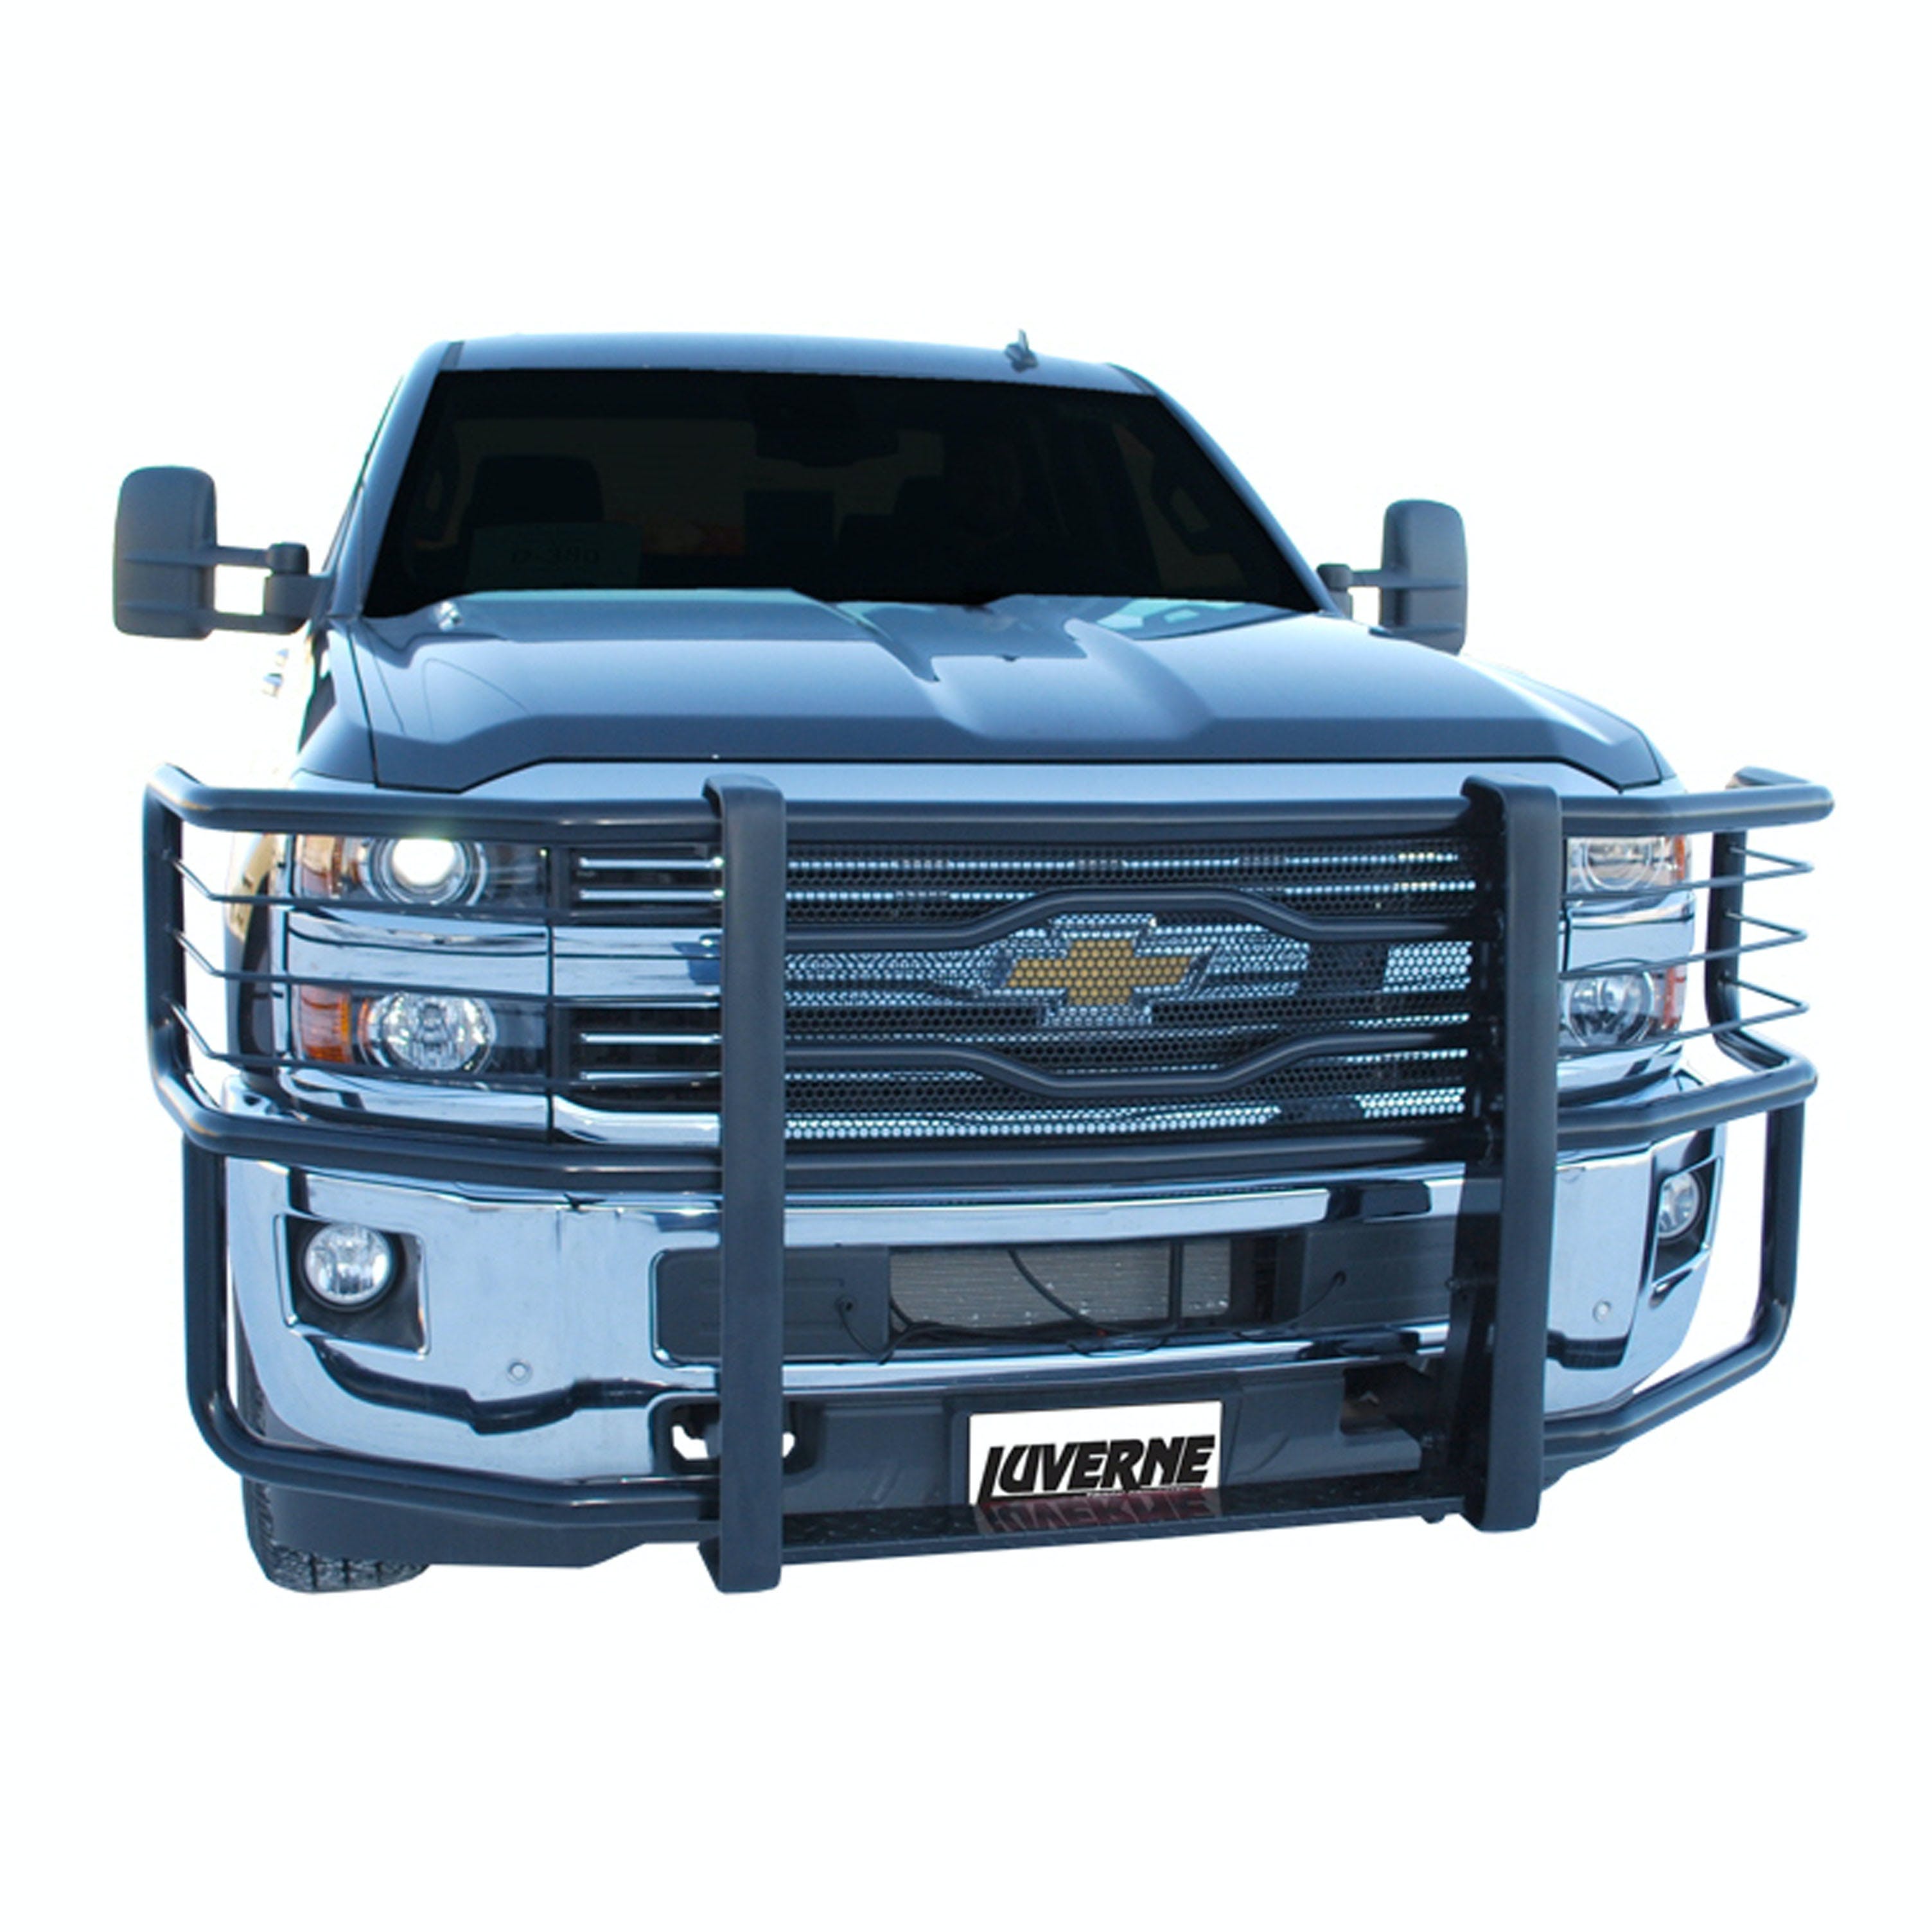 LUVERNE 321112 Prowler Max Grille Guard Brackets